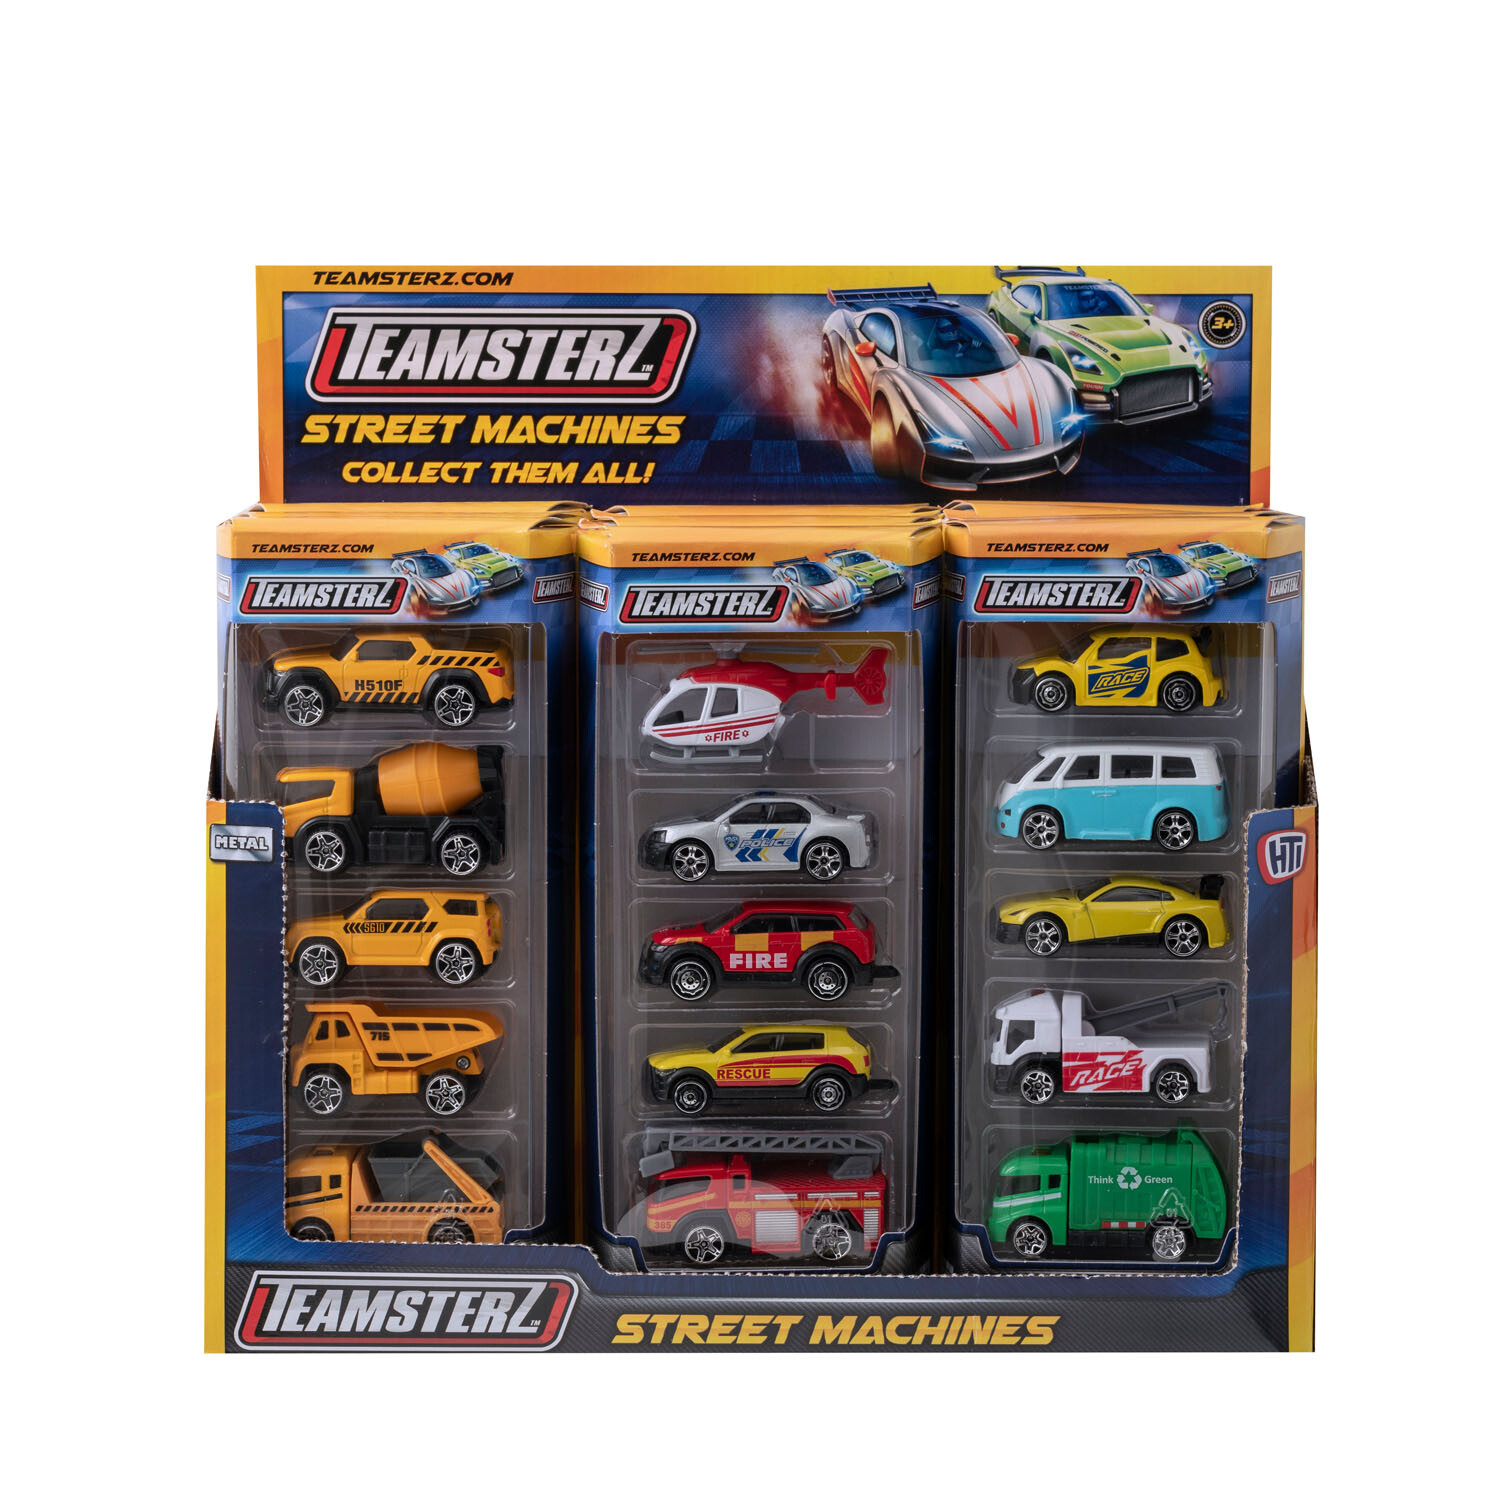 Single Teamsterz Street Machines Car Toy 5 Pack in Assorted styles Image